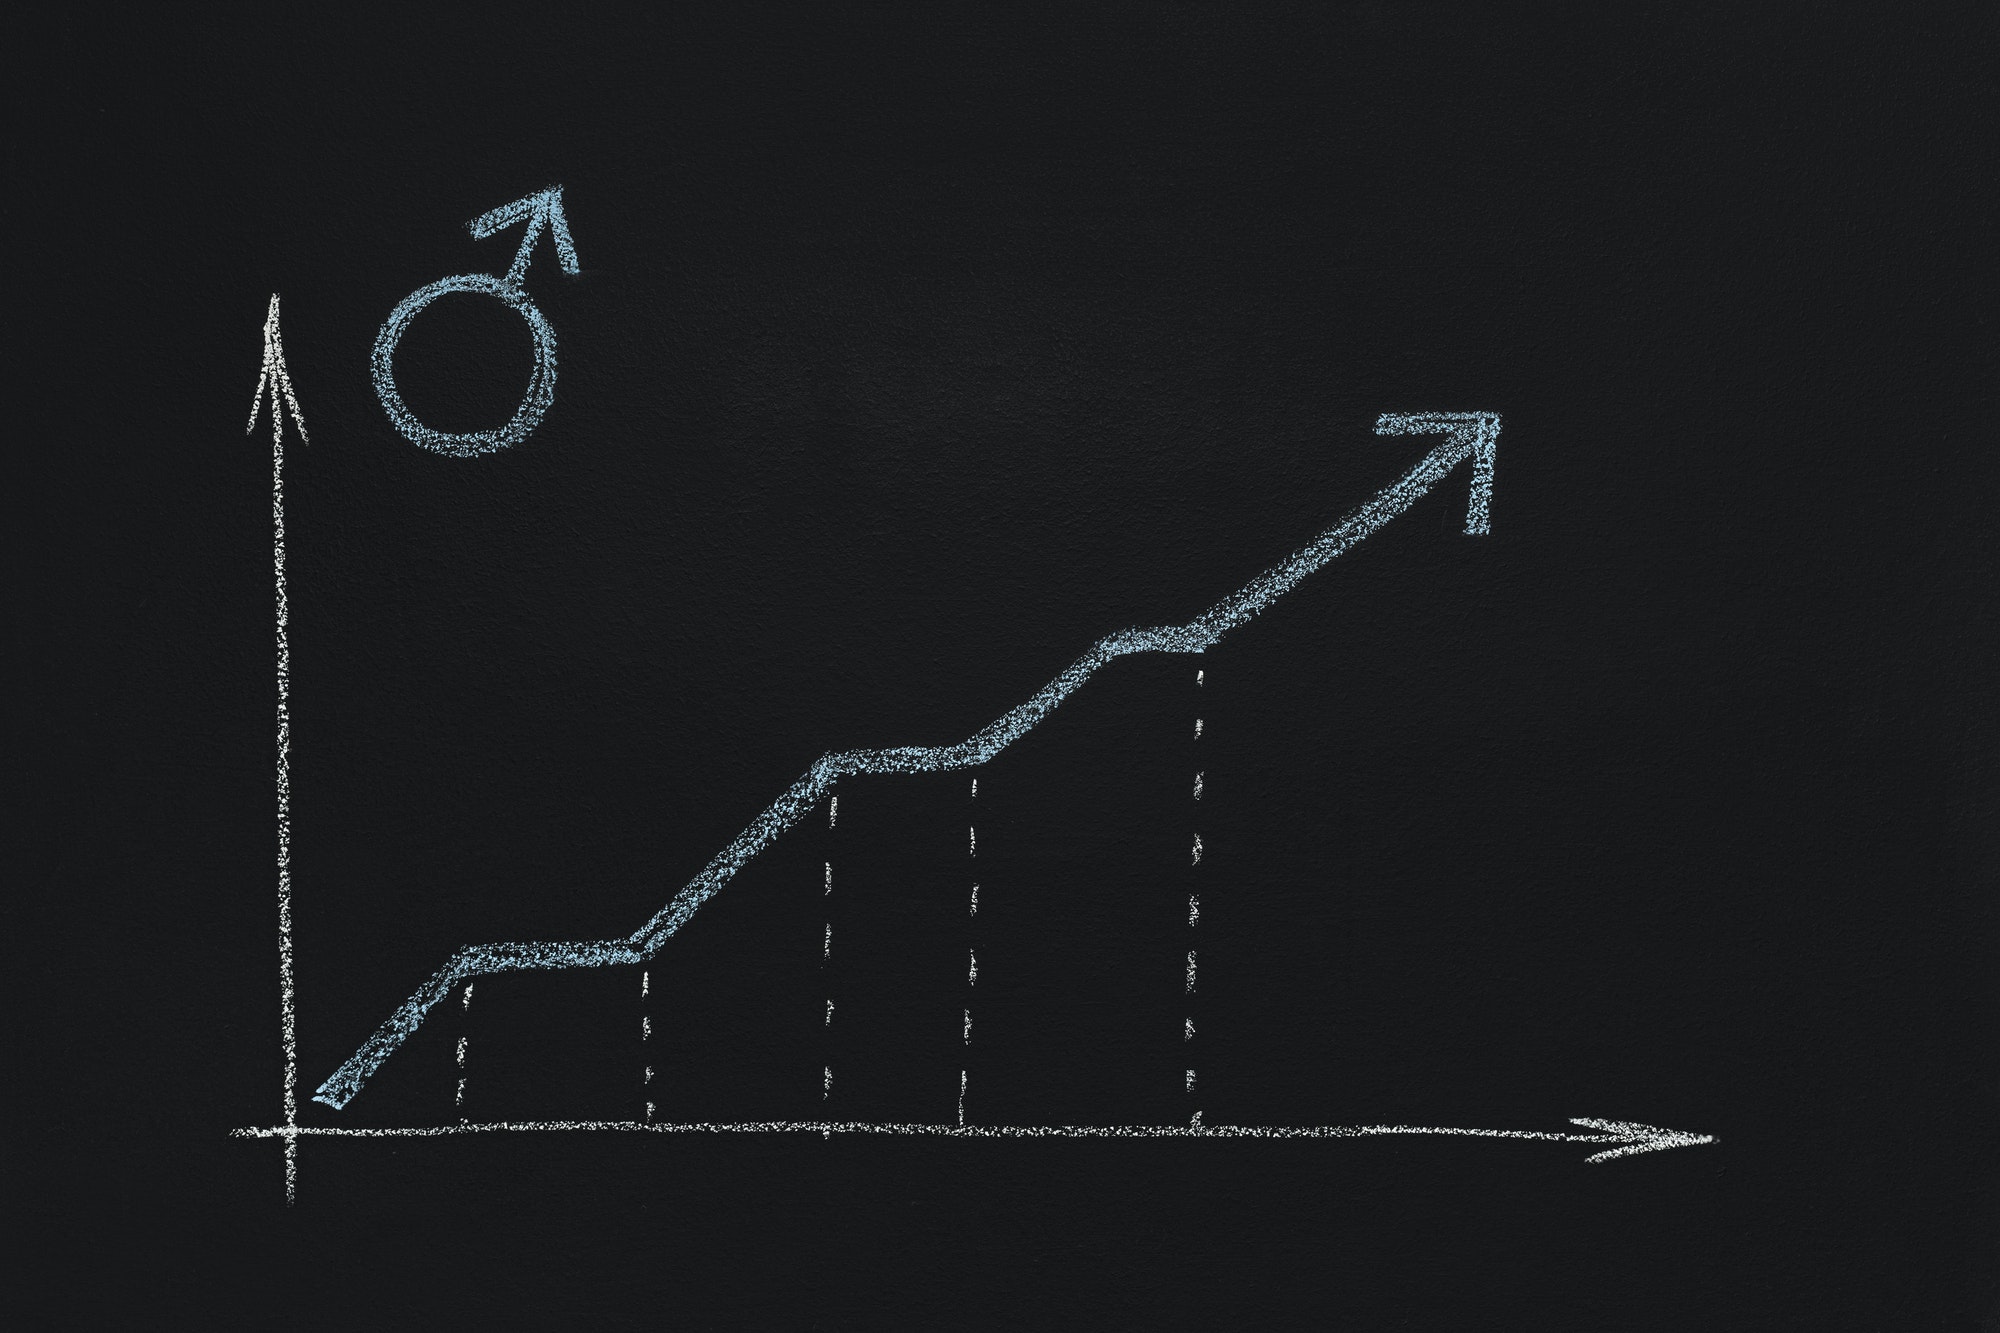 Male gender symbol with growing graph on chalkboard